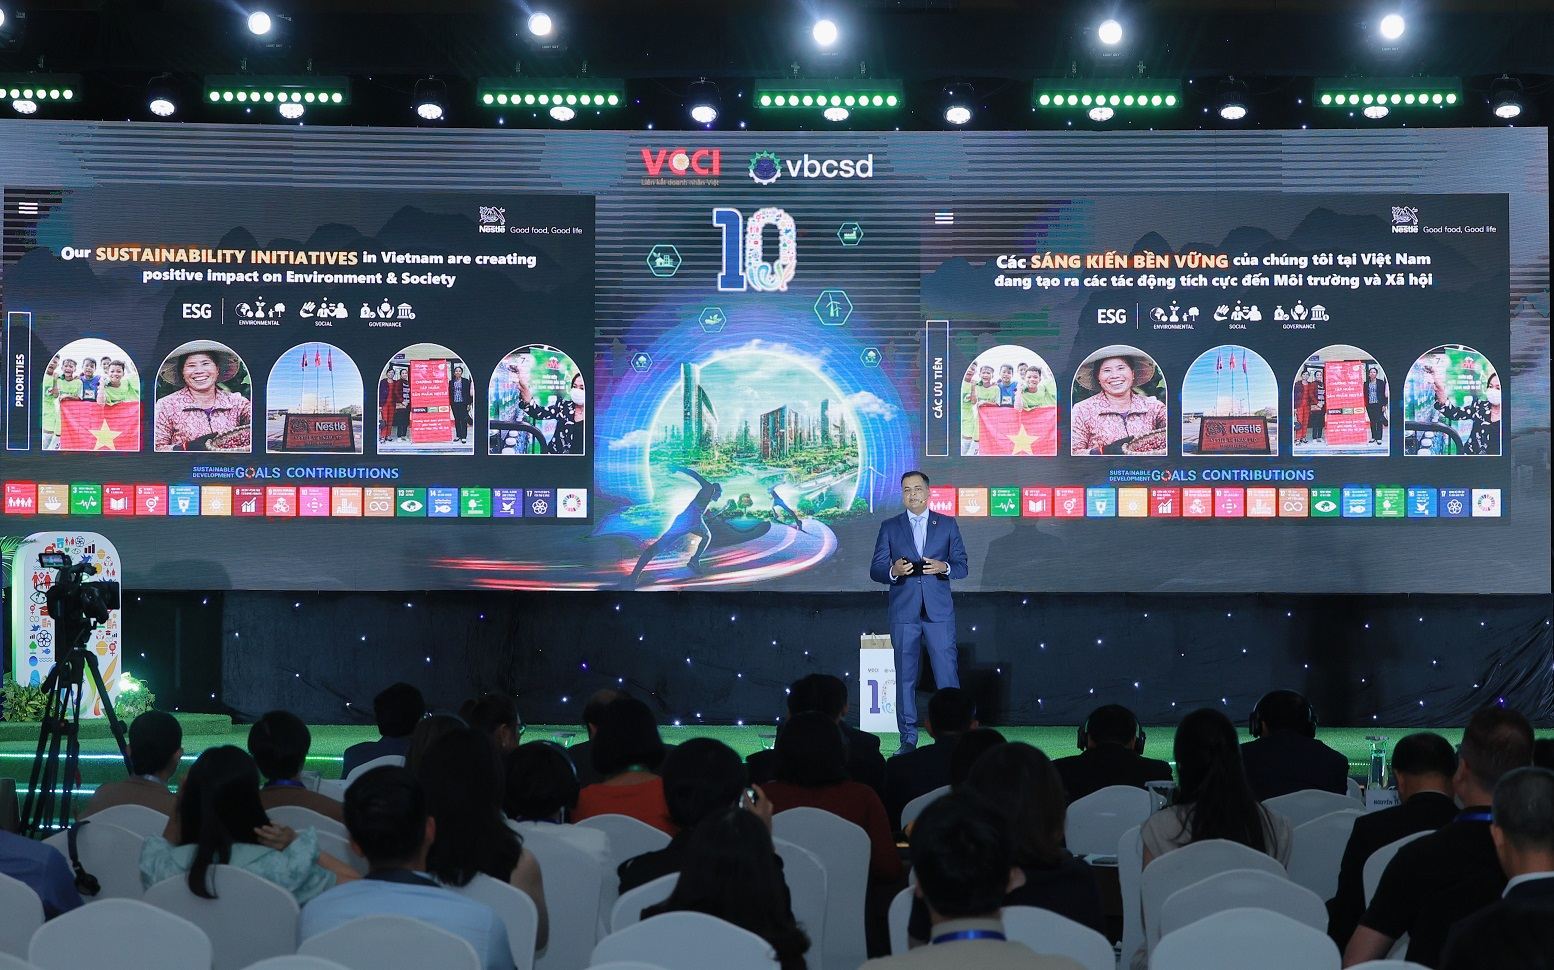 Mr. Binu Jacob, General Director of Nestlé Vietnam (NVL), and Co-Chairman of VBCSD, shared at the forum. Photo: Tung Dinh.